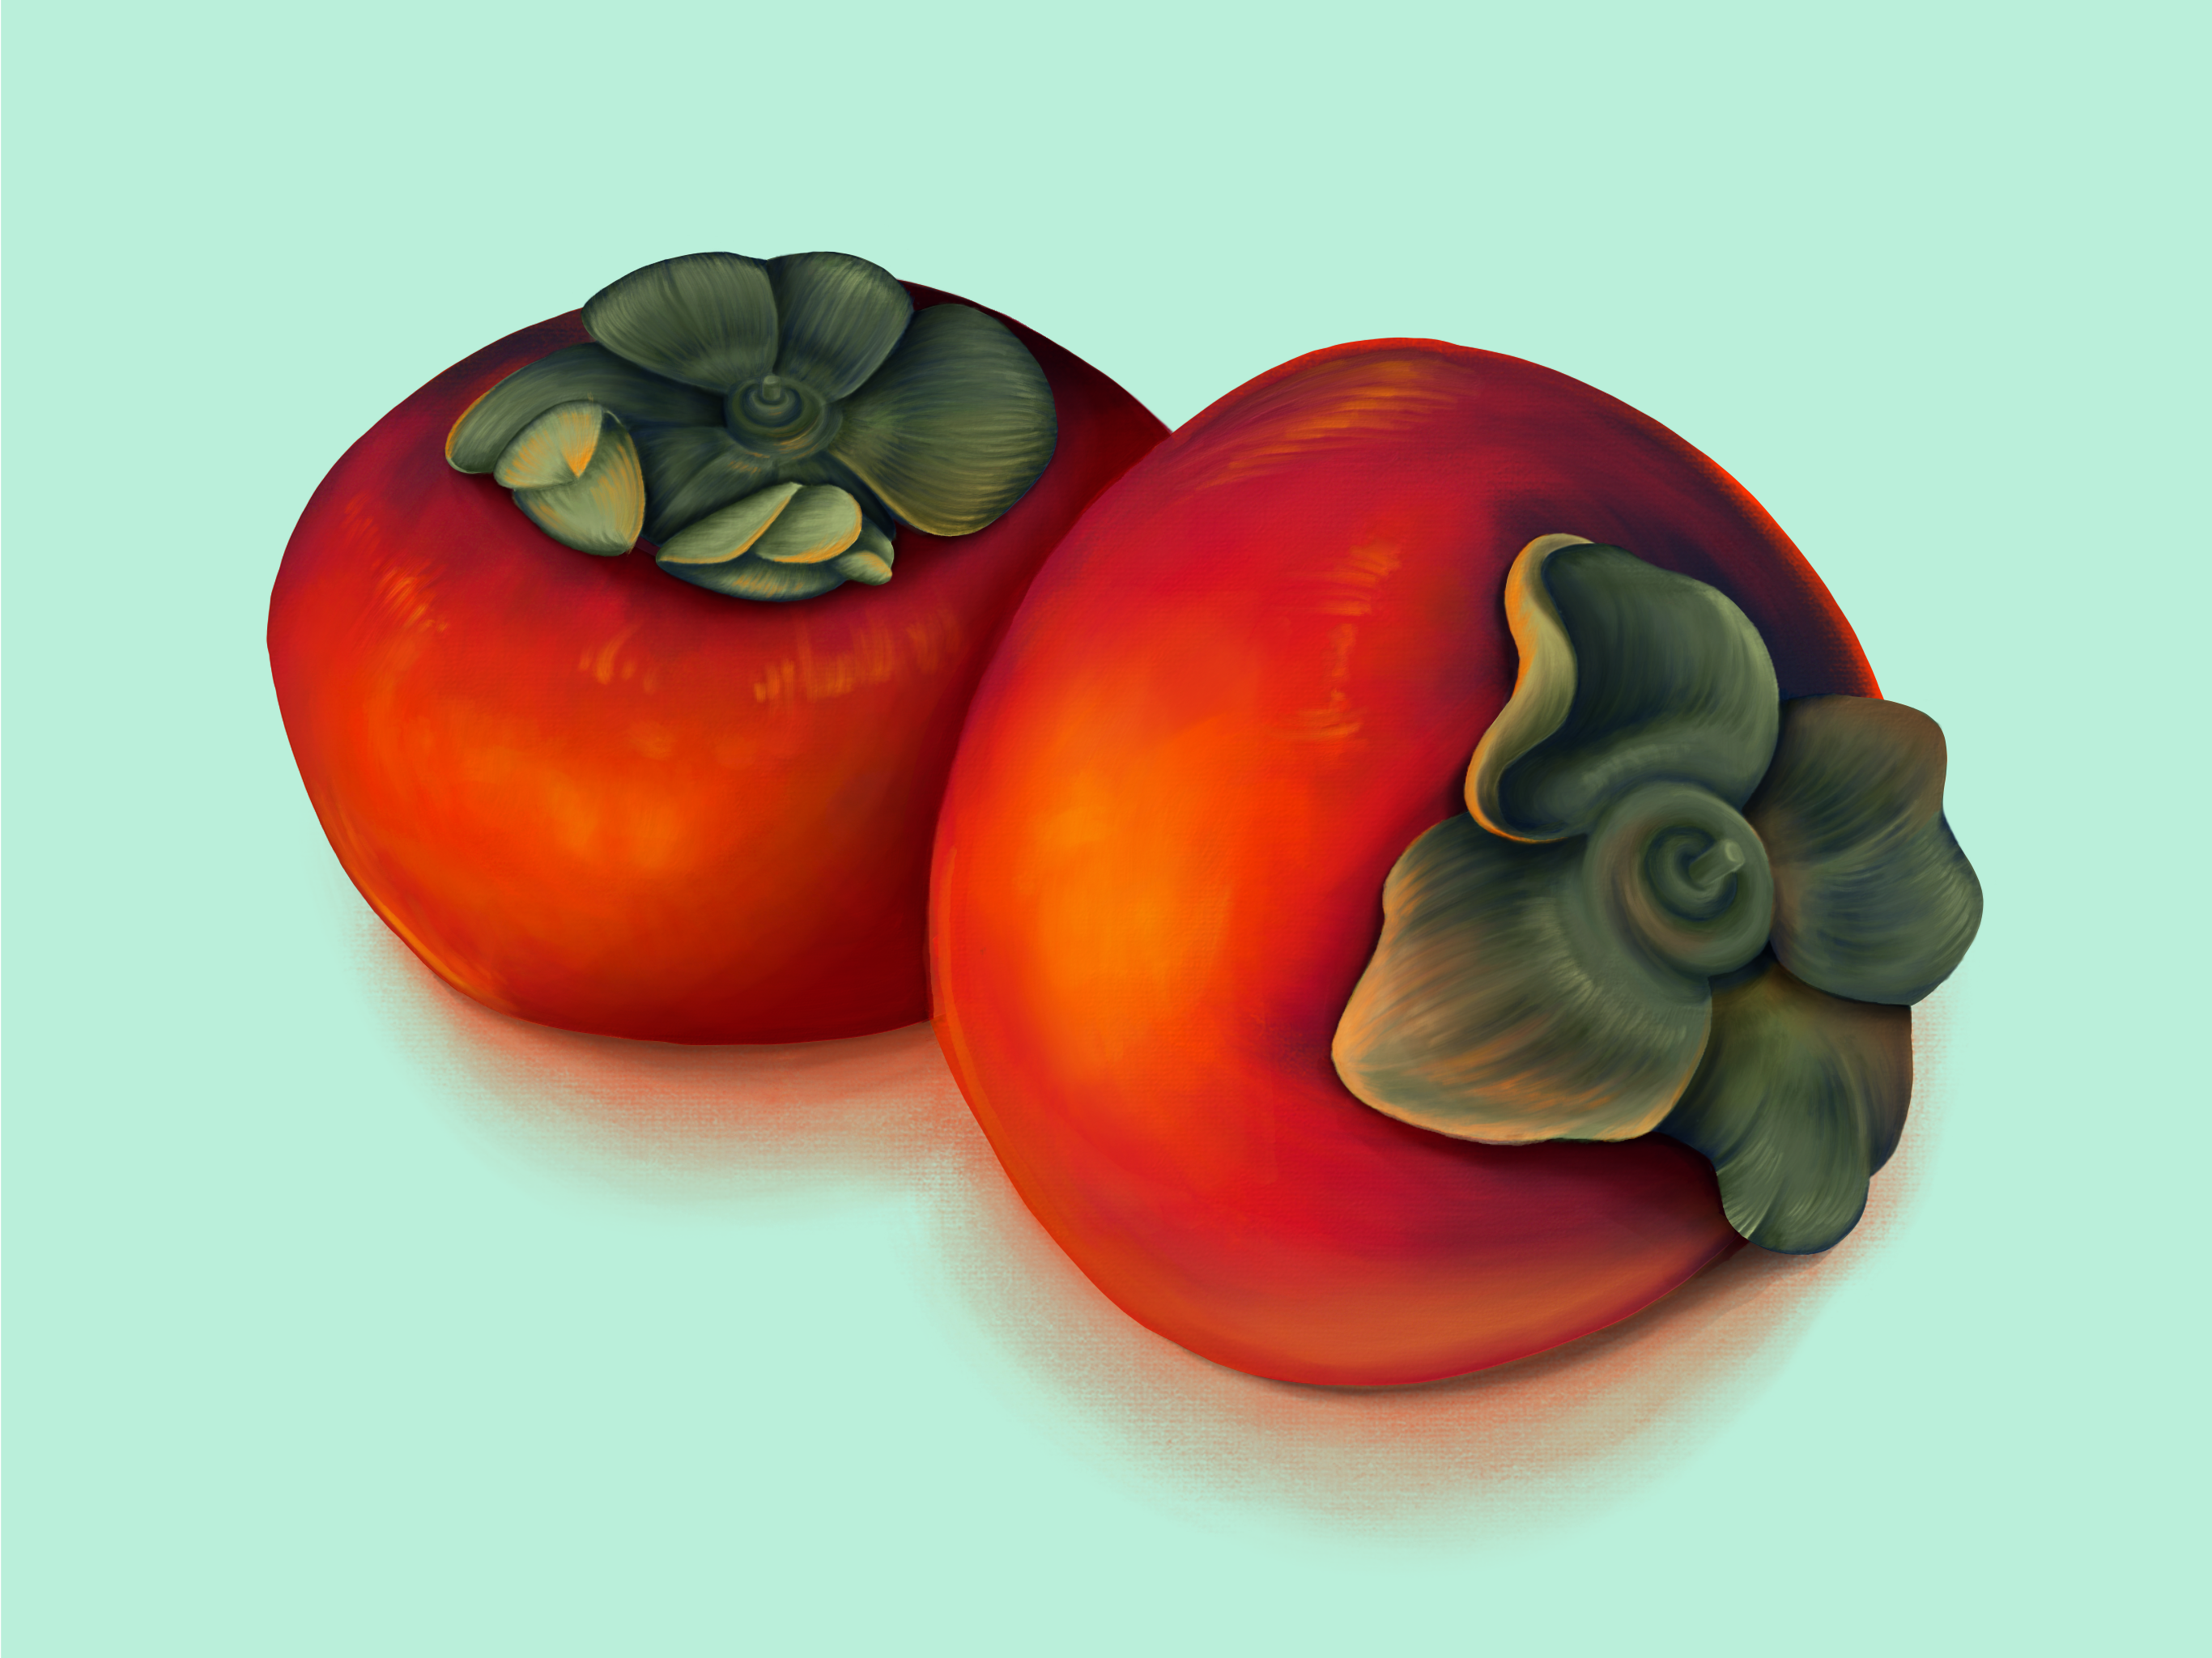 Digital painting of 2 persimmons in the style of an oil painting.